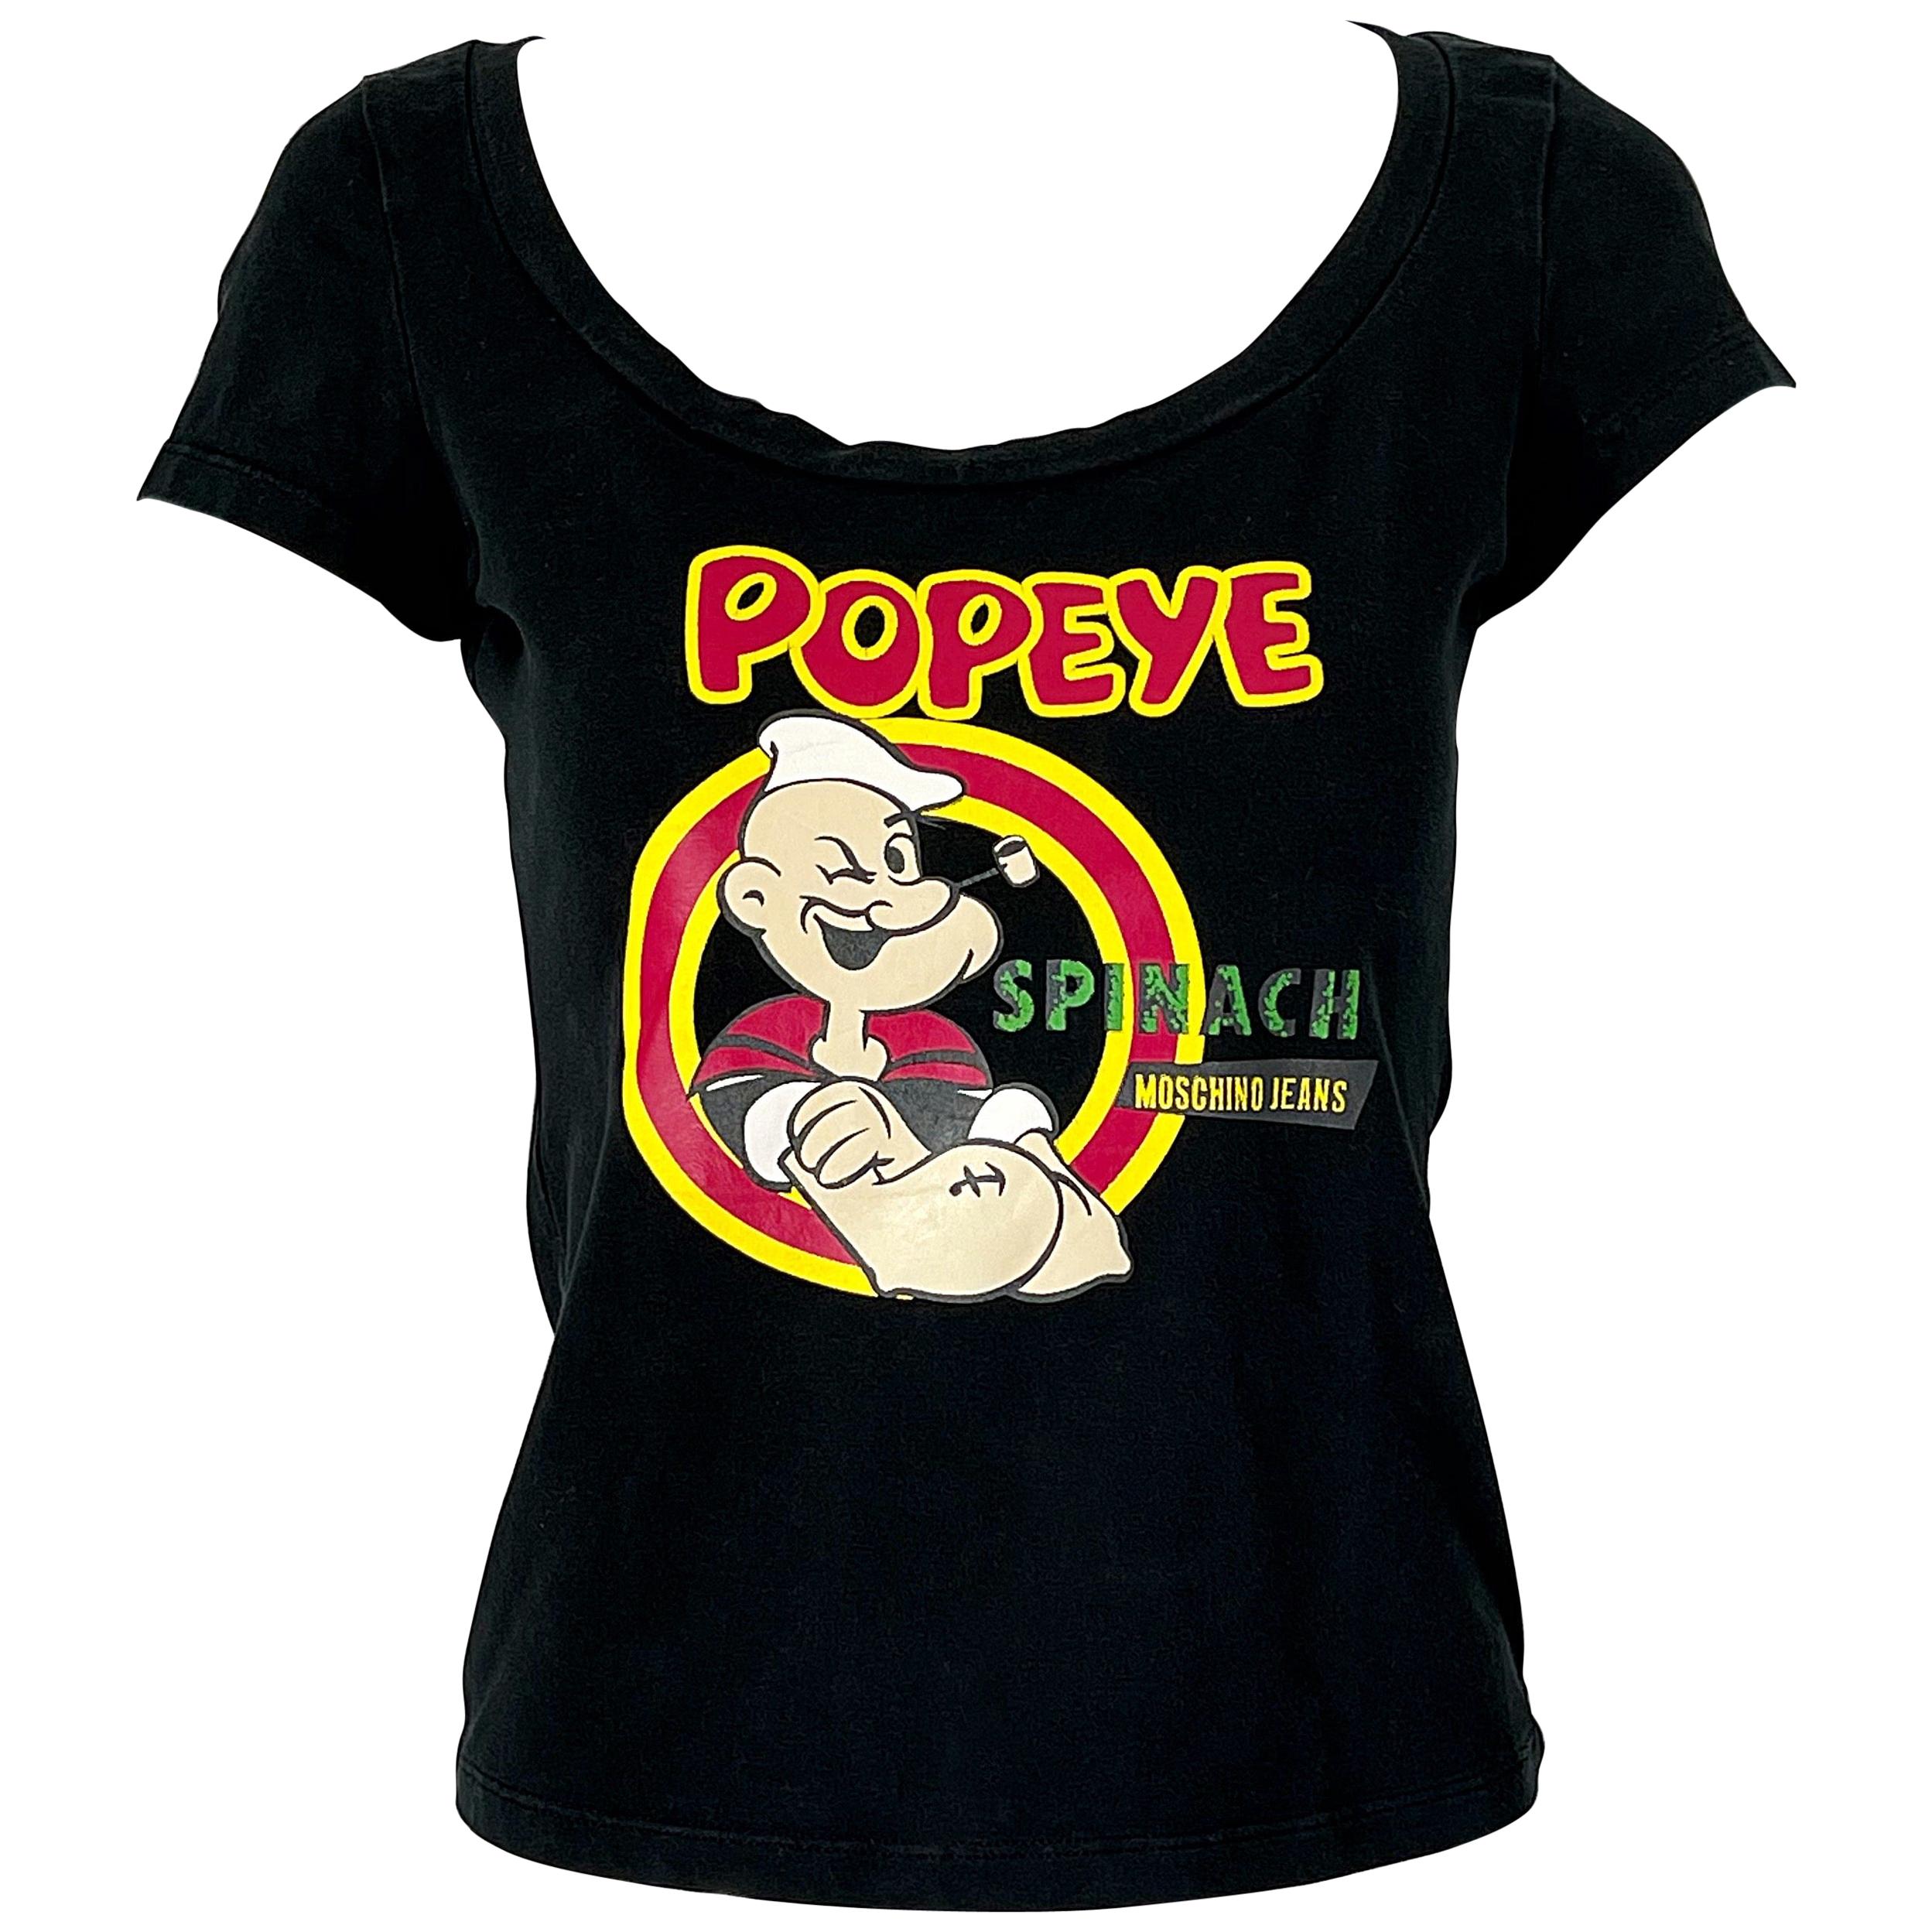 Moschino 1990s Popeye the Sailor Man Novelty Print Vintage 90s Tee Shirt Spinach